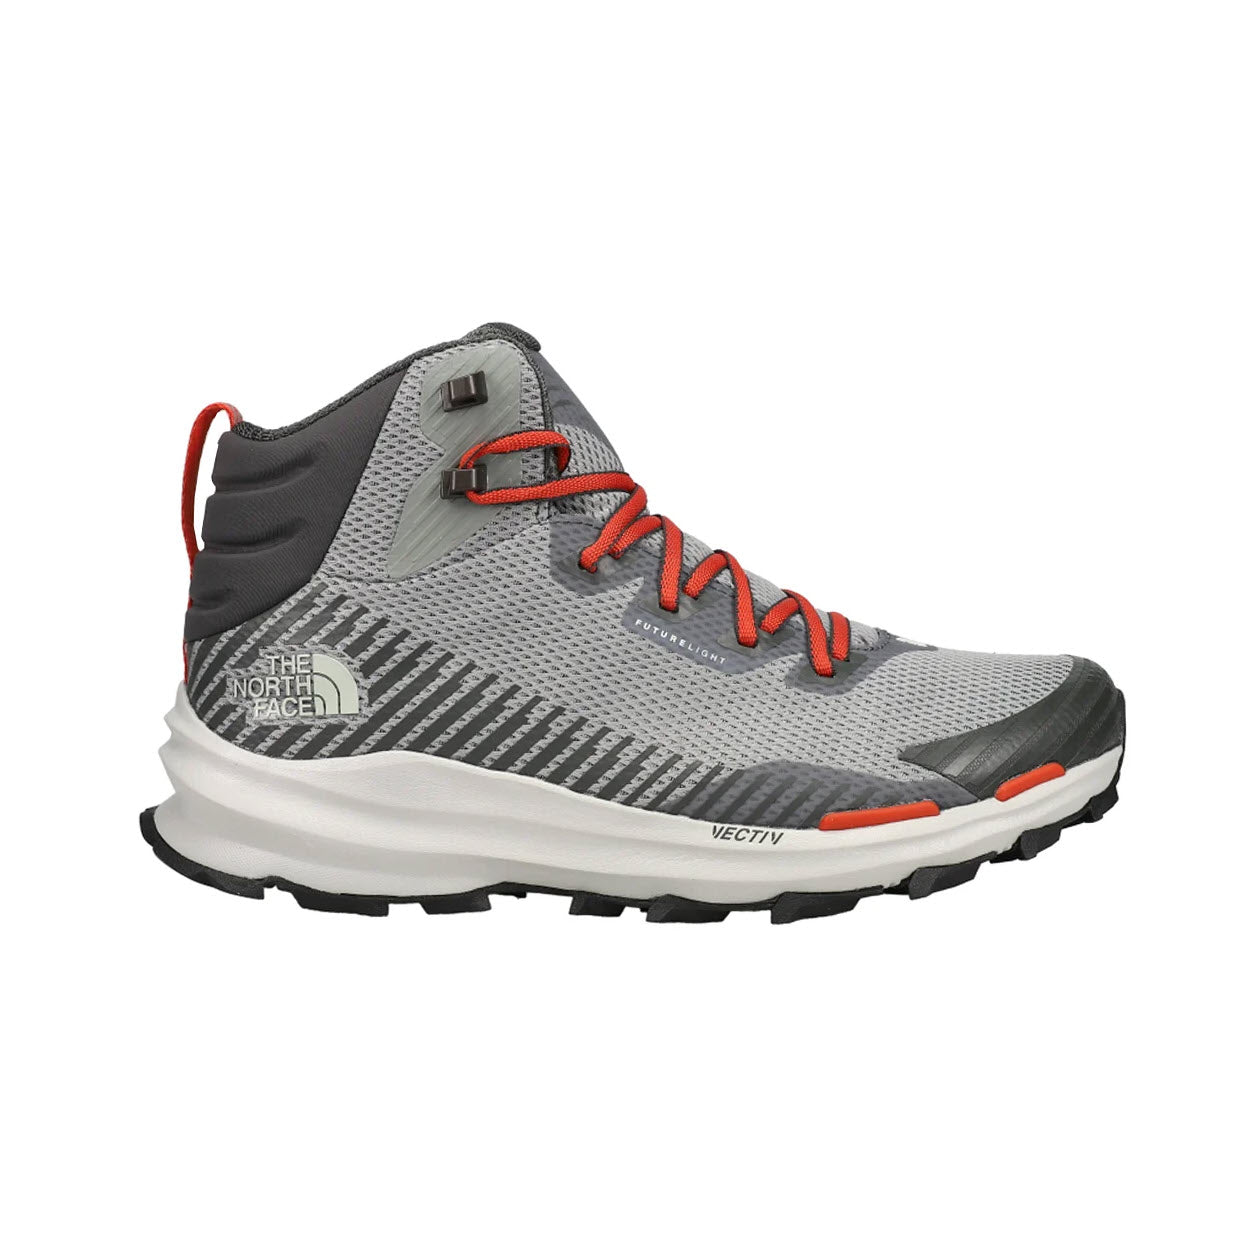 A gray and red North Face VECTIV Fastpack Mid Meld Grey hiking boot with an ankle-high design and striped details on the side.